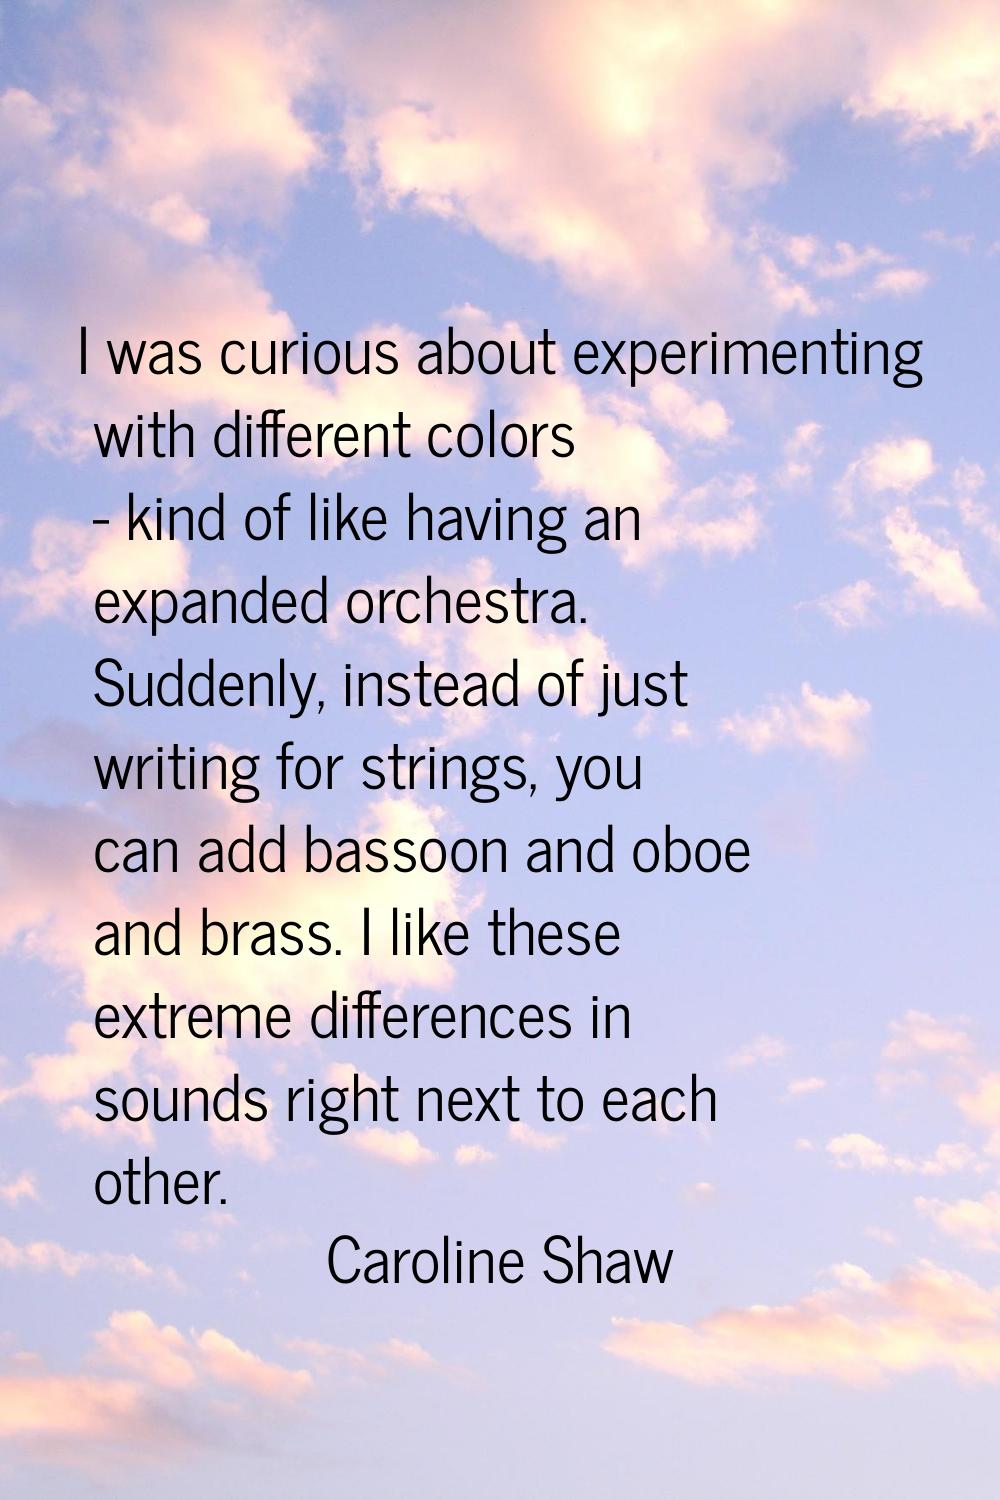 I was curious about experimenting with different colors - kind of like having an expanded orchestra